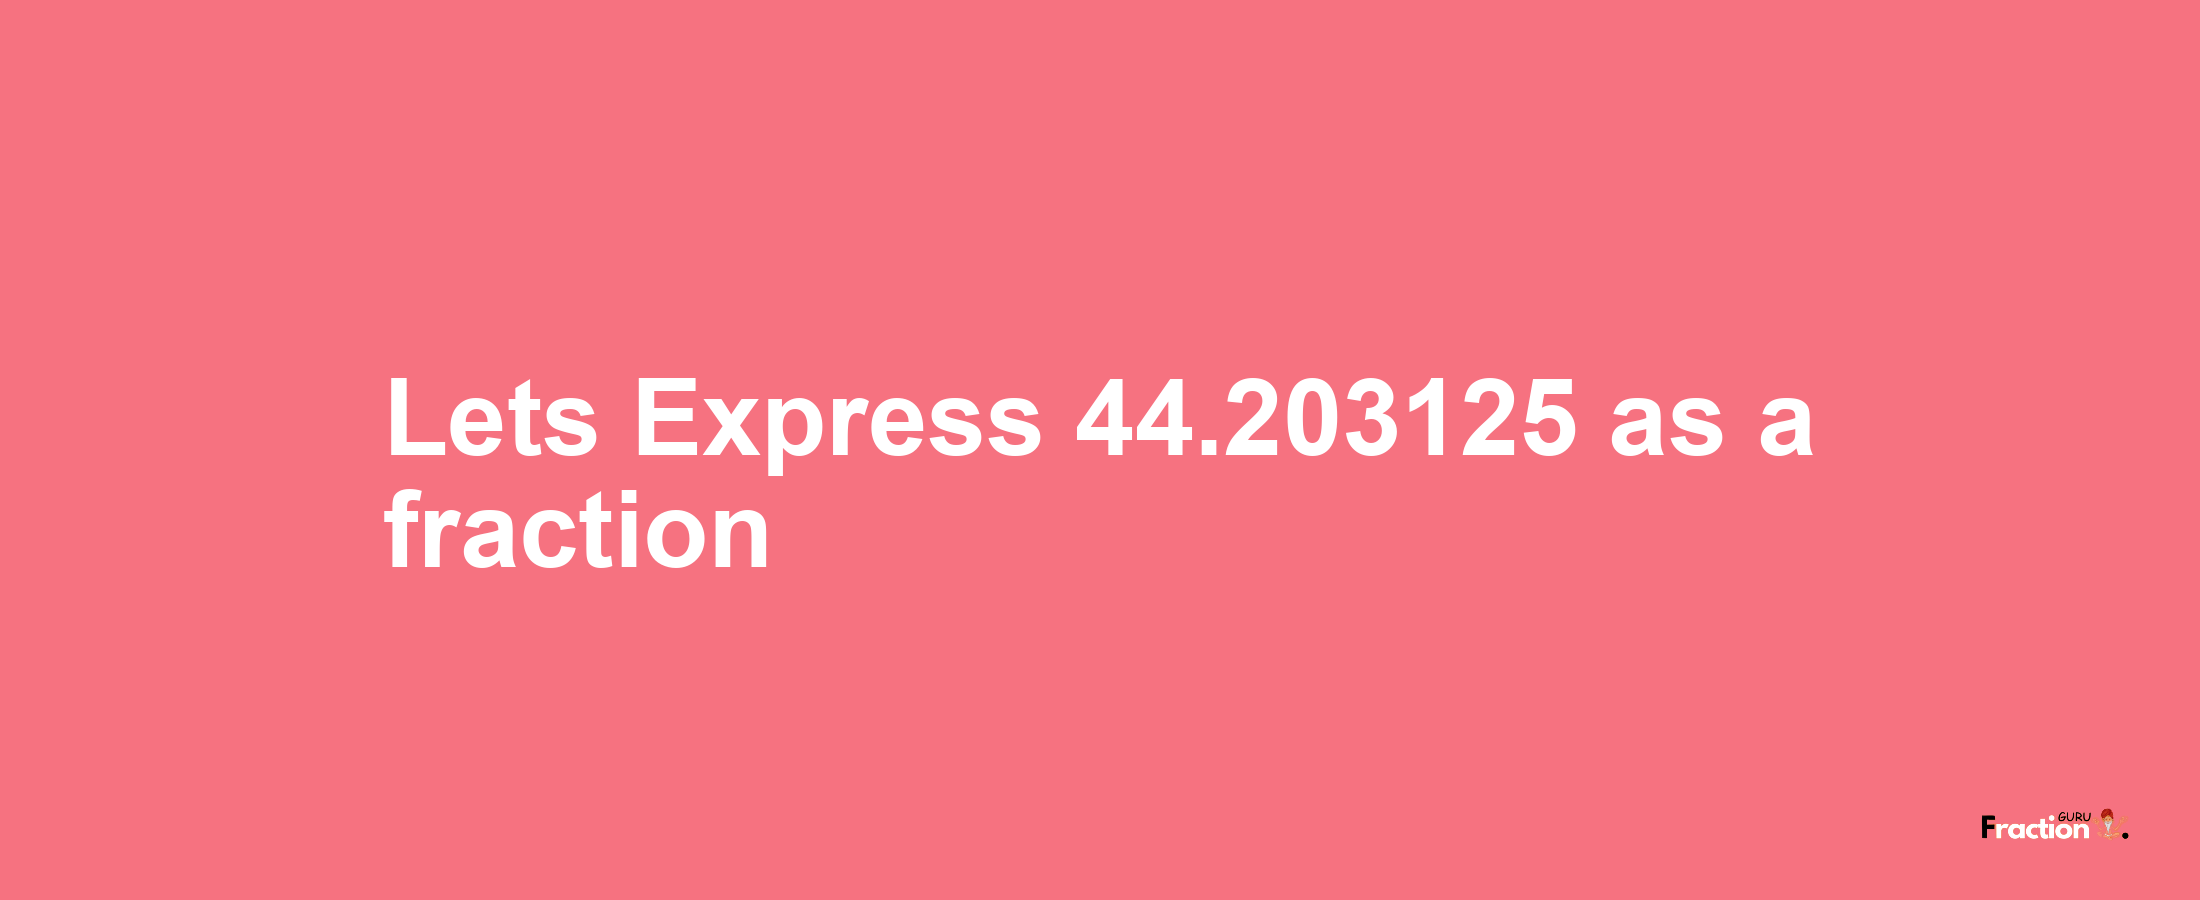 Lets Express 44.203125 as afraction